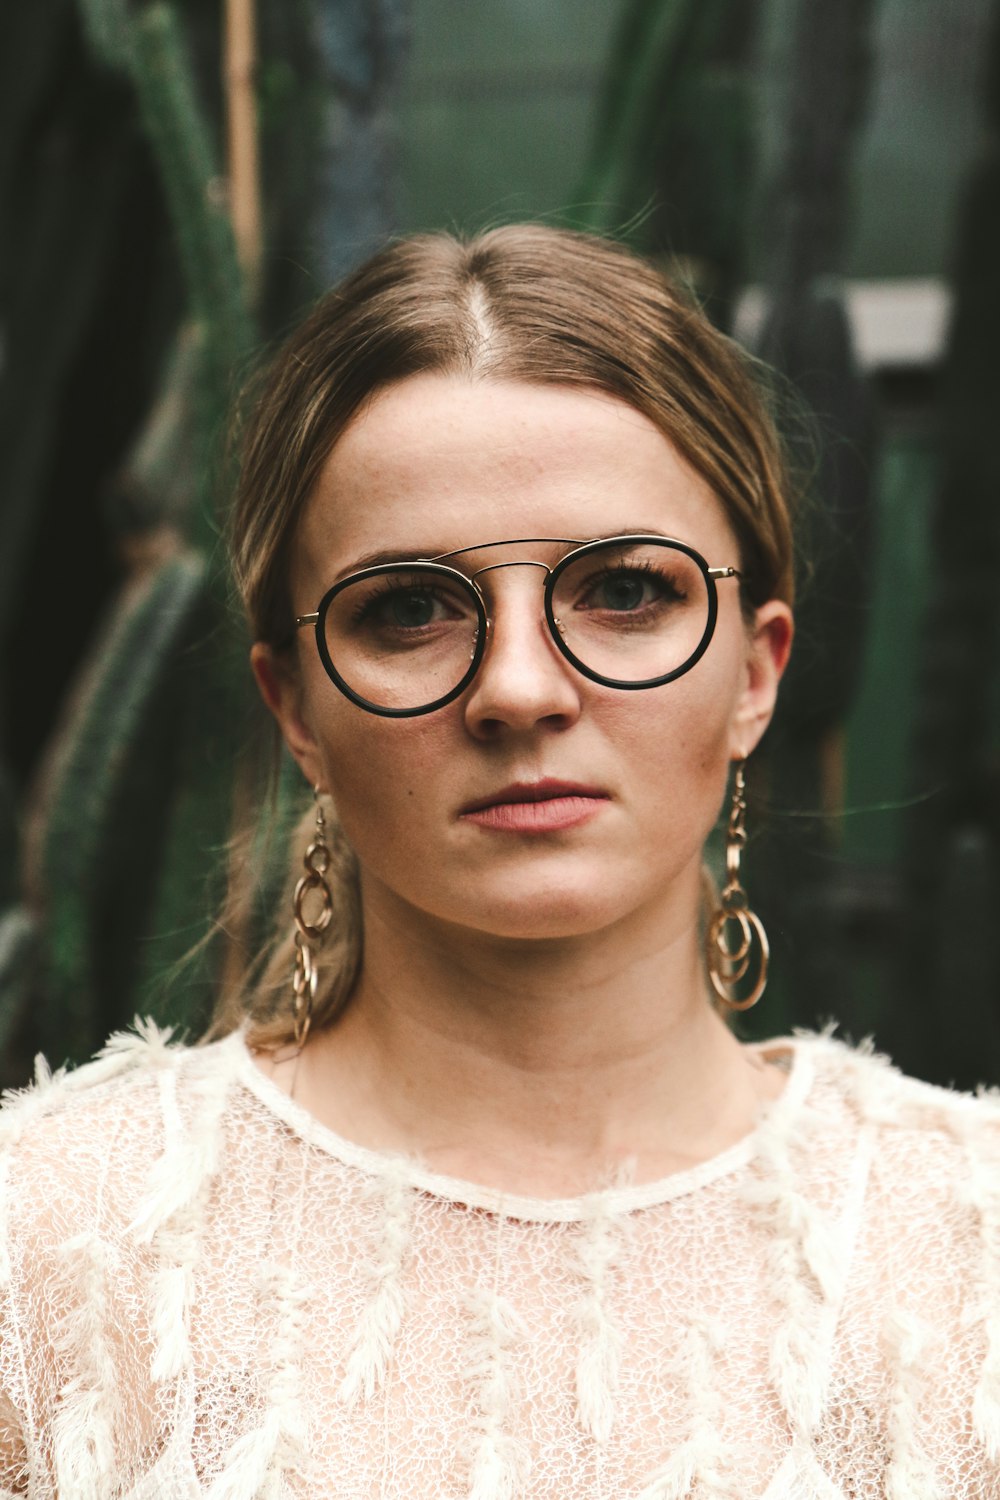 woman wearing eyeglasses and white lace top